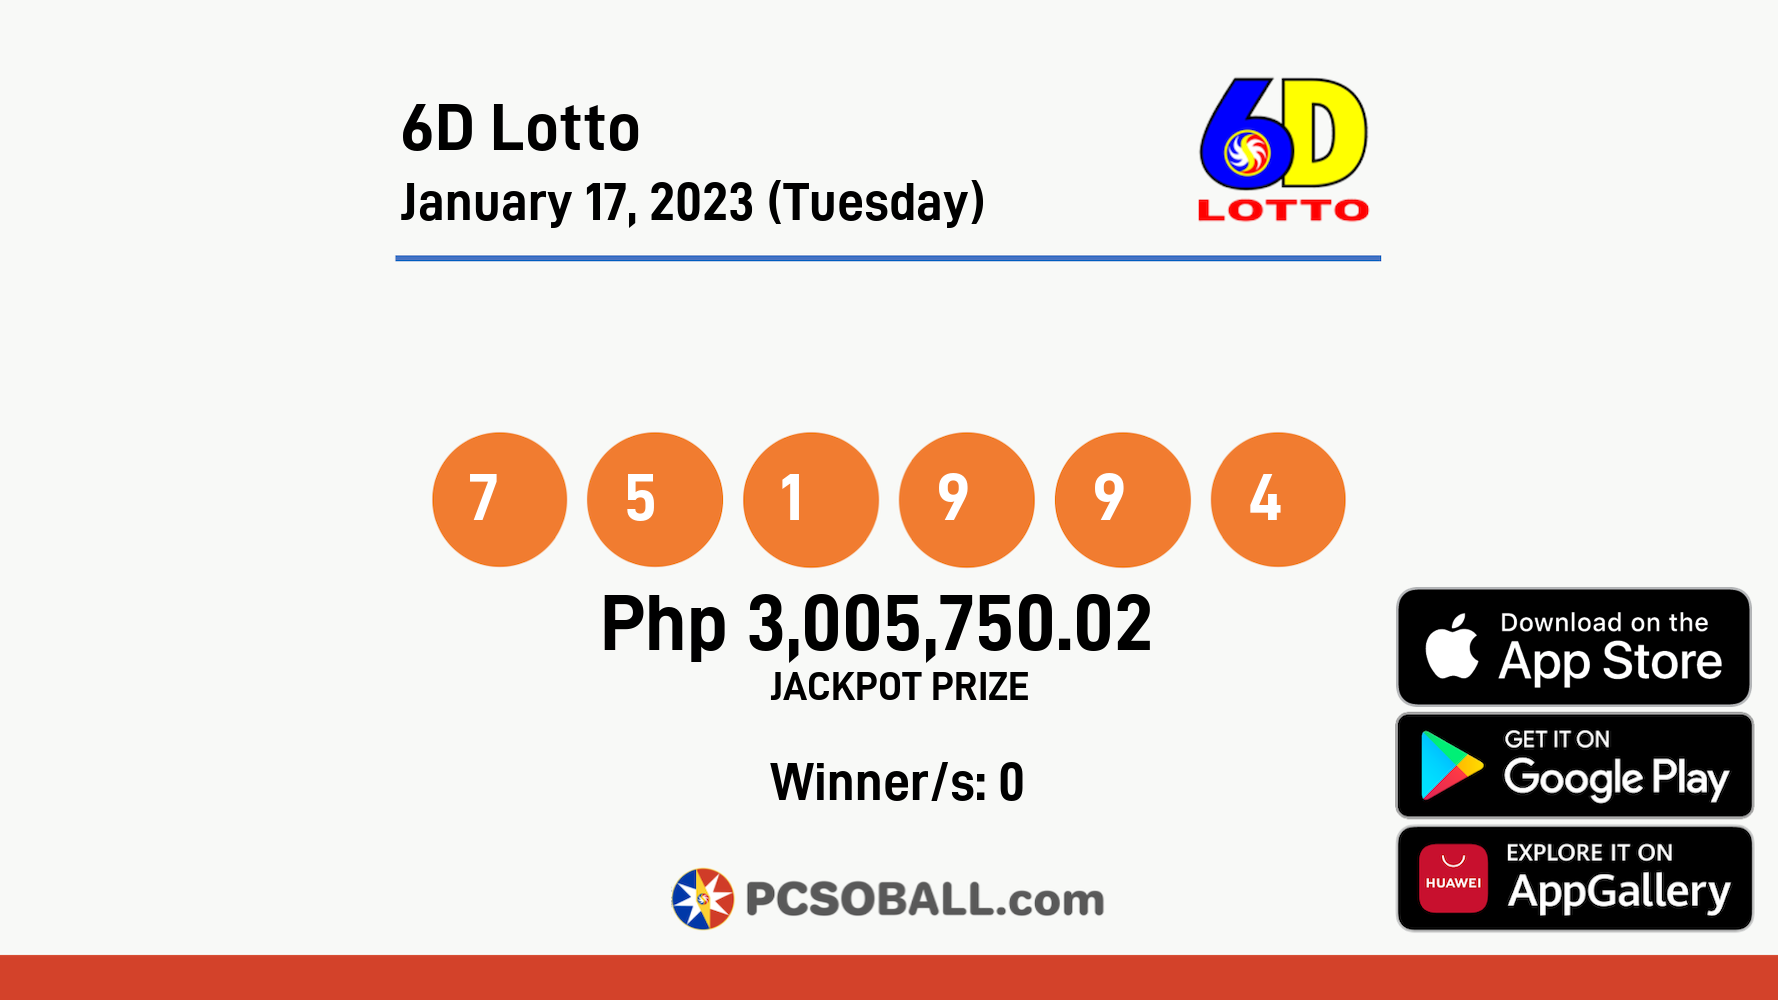 6D Lotto January 17, 2023 (Tuesday) Result